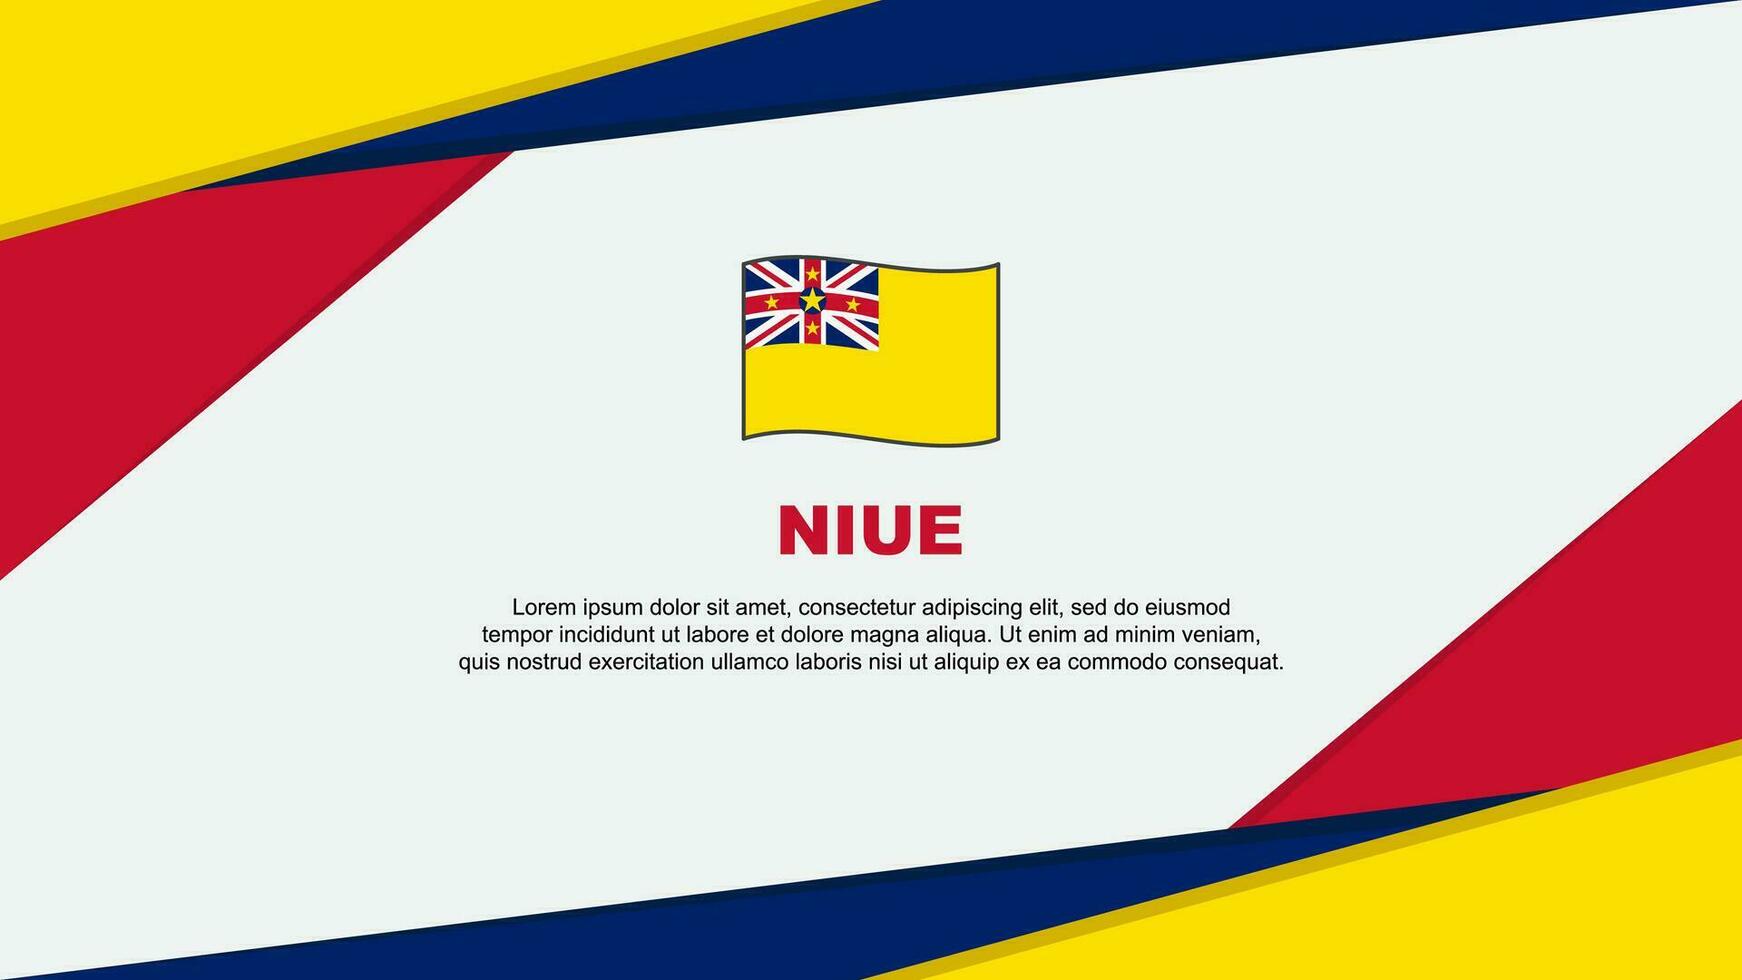 Niue Flag Abstract Background Design Template. Niue Independence Day Banner Cartoon Vector Illustration. Niue